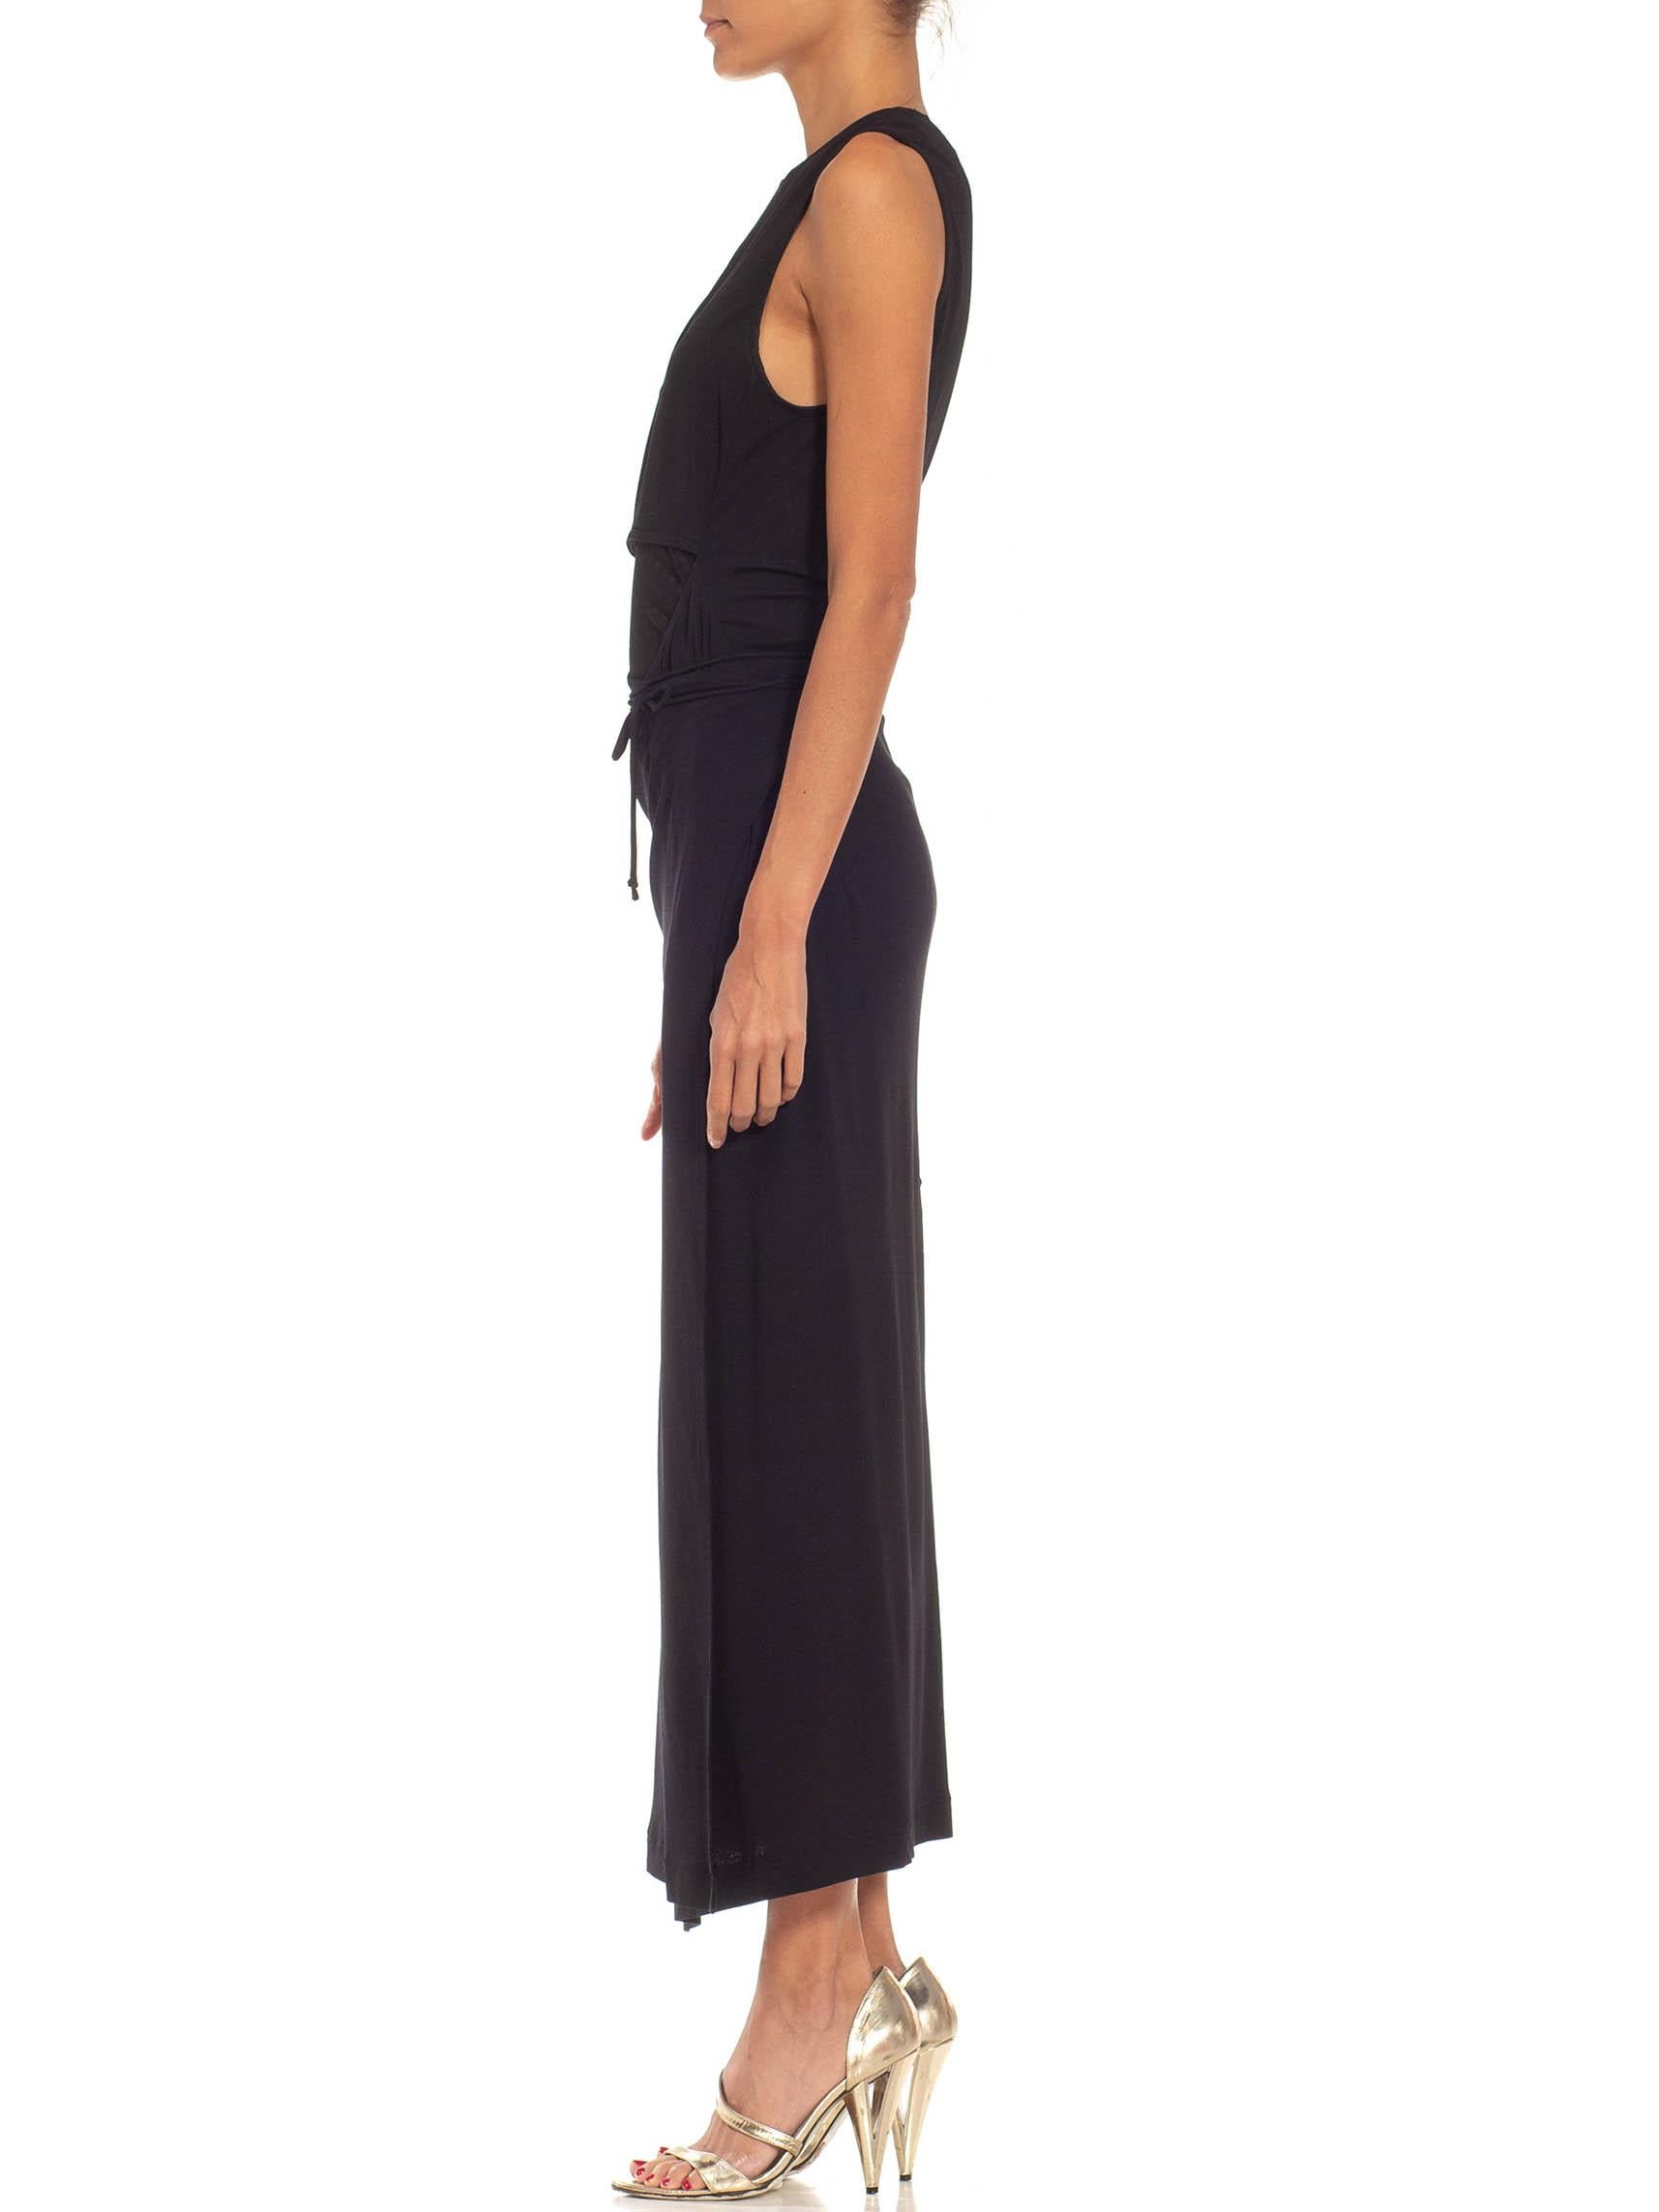 1990S DONNA KARAN Black Rayon& Elastane Gown In Excellent Condition For Sale In New York, NY